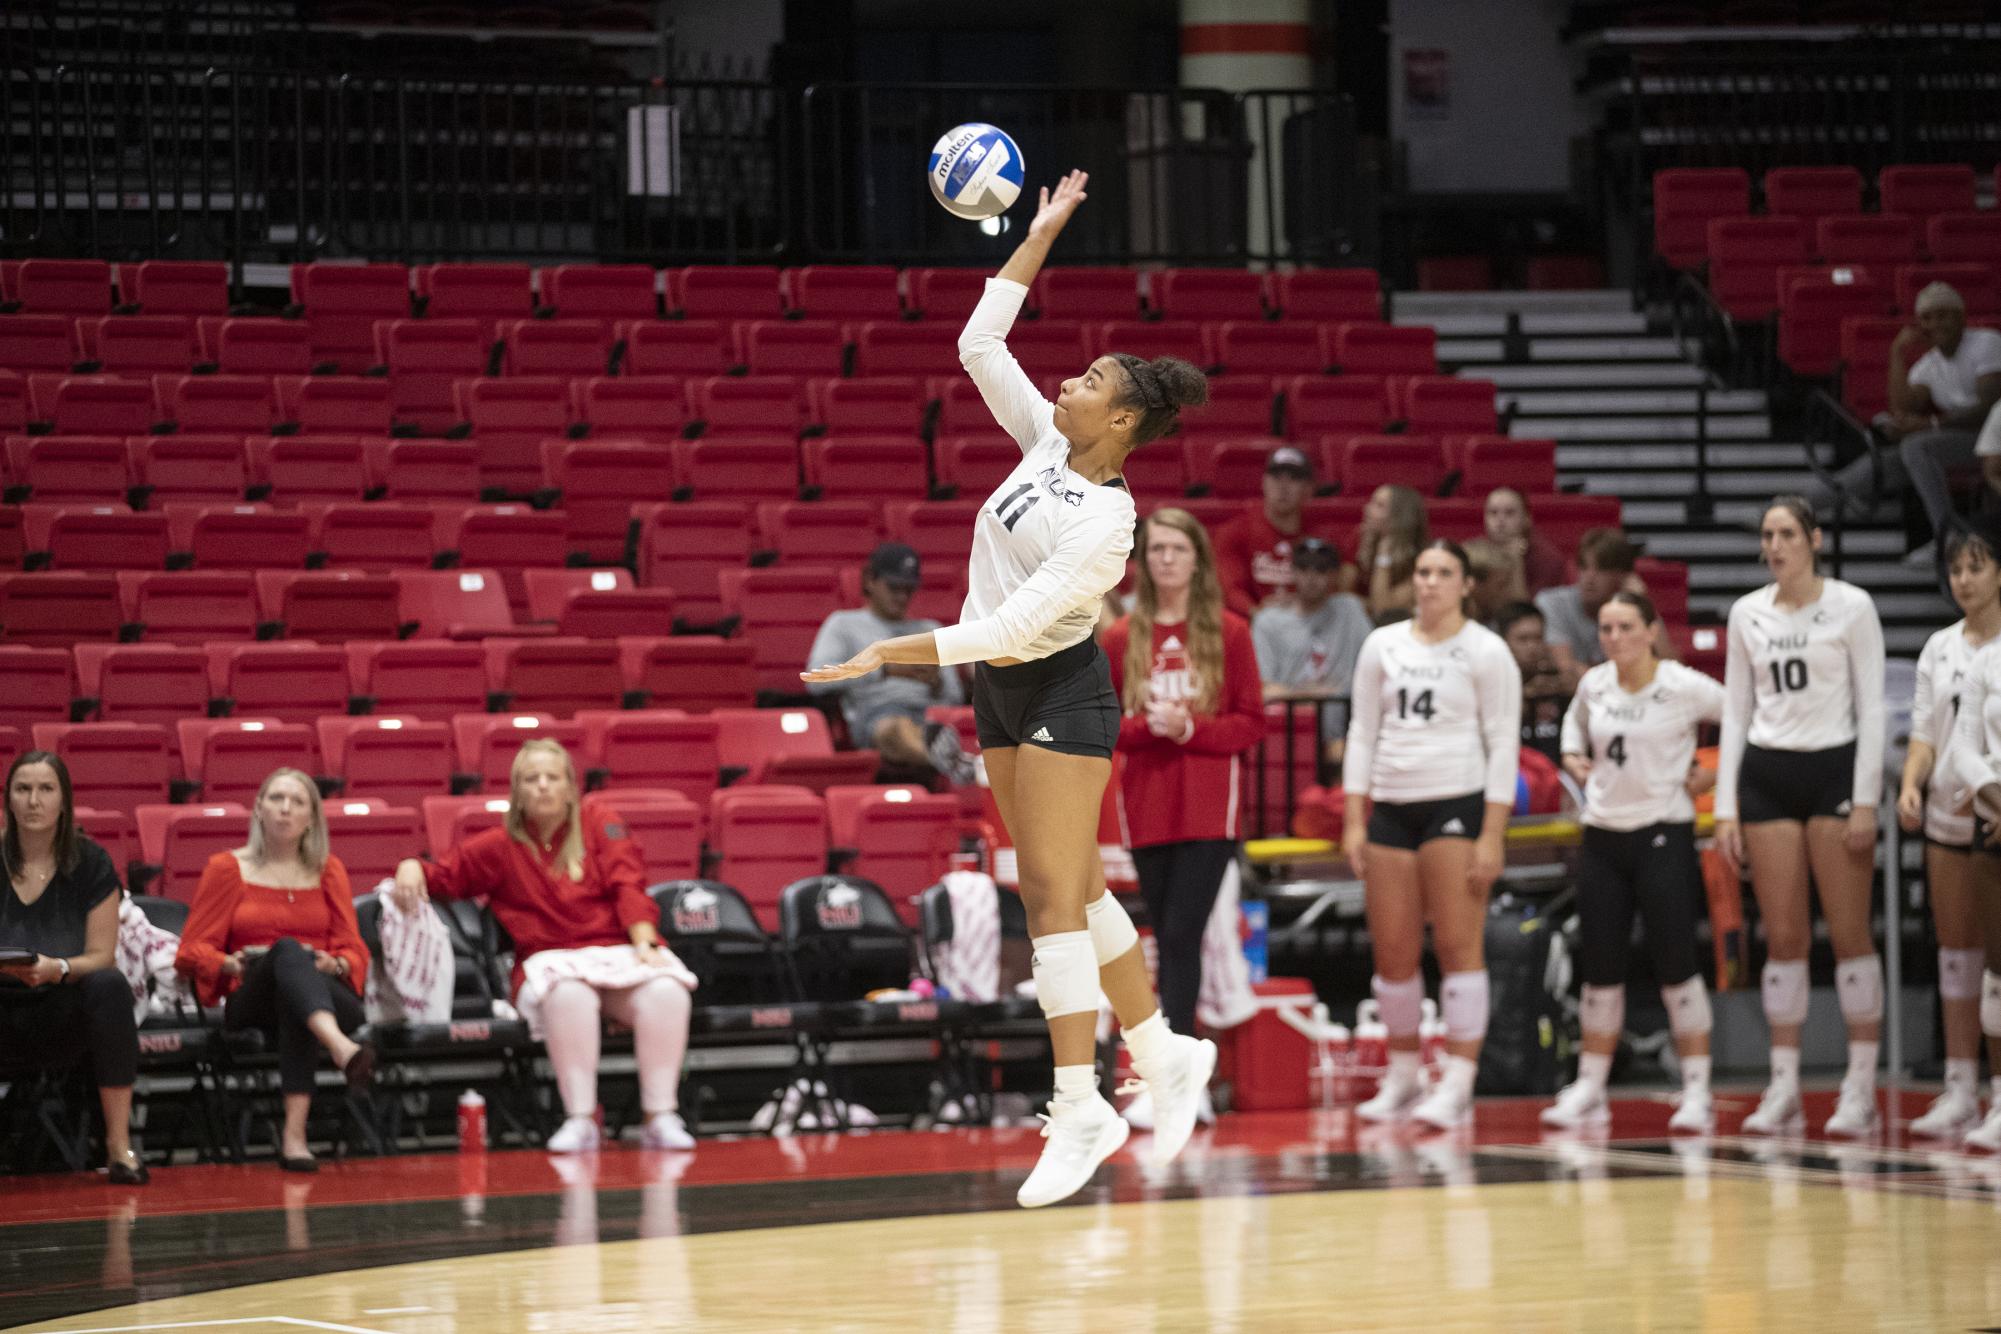 Junior middle blocker Charli Atiemo serves the ball during NIU’s season-opener against the Chicago State University Cougars on Aug. 25 at the NIU Convocation Center. The Huskies are set to play in Victor E. Court for the first time this season Friday against the Miami University RedHawks. (Courtesy NIU Athletics)